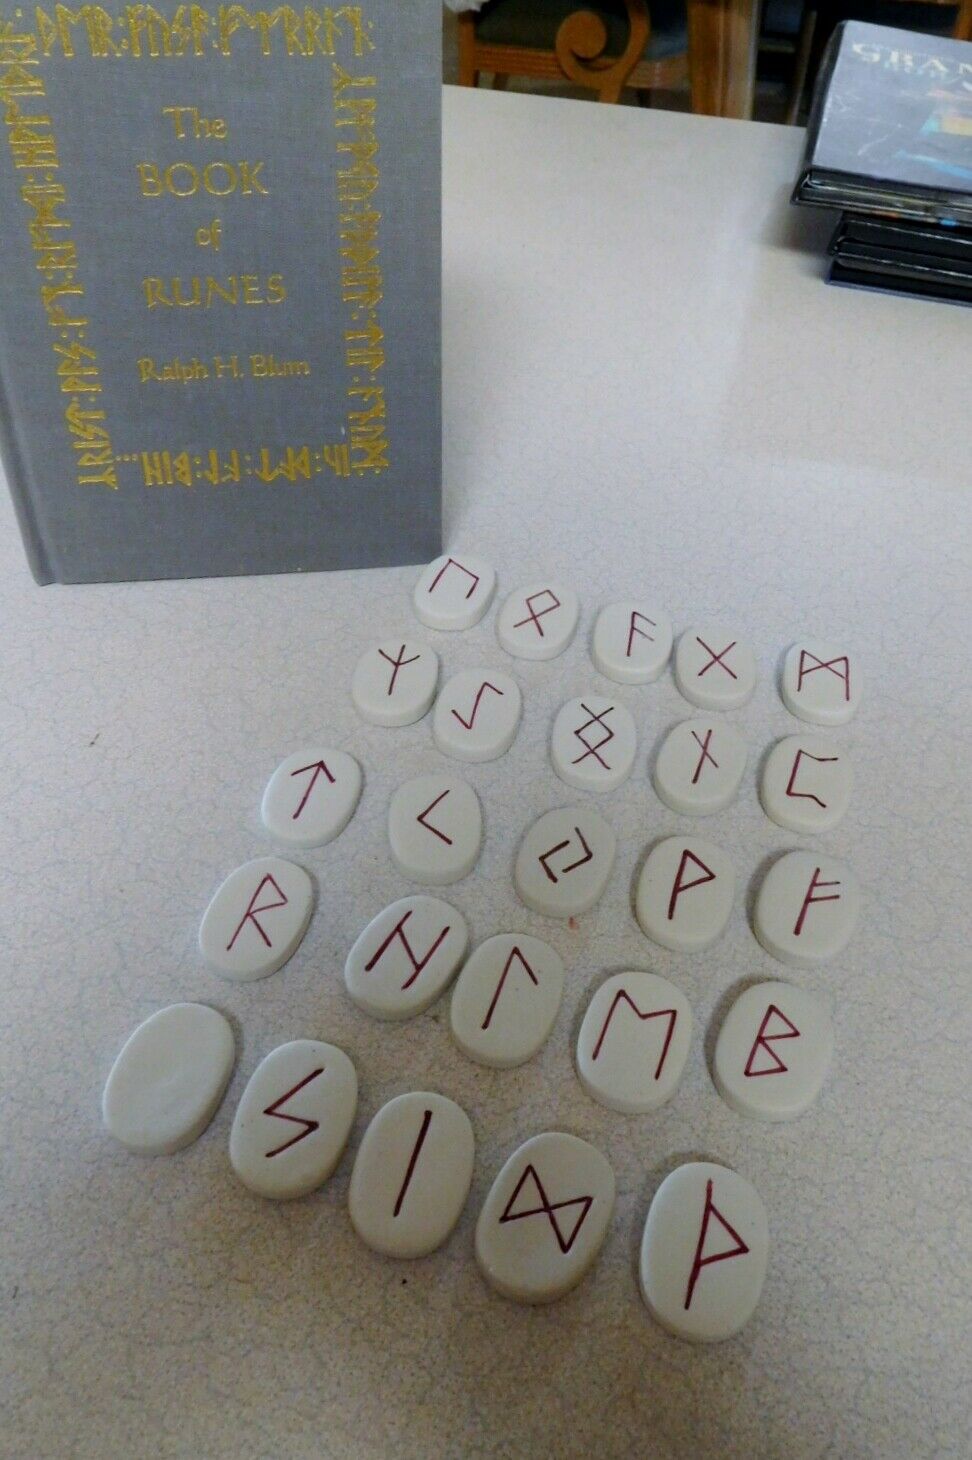 The Book Of Runes And Rune Stones - Complete